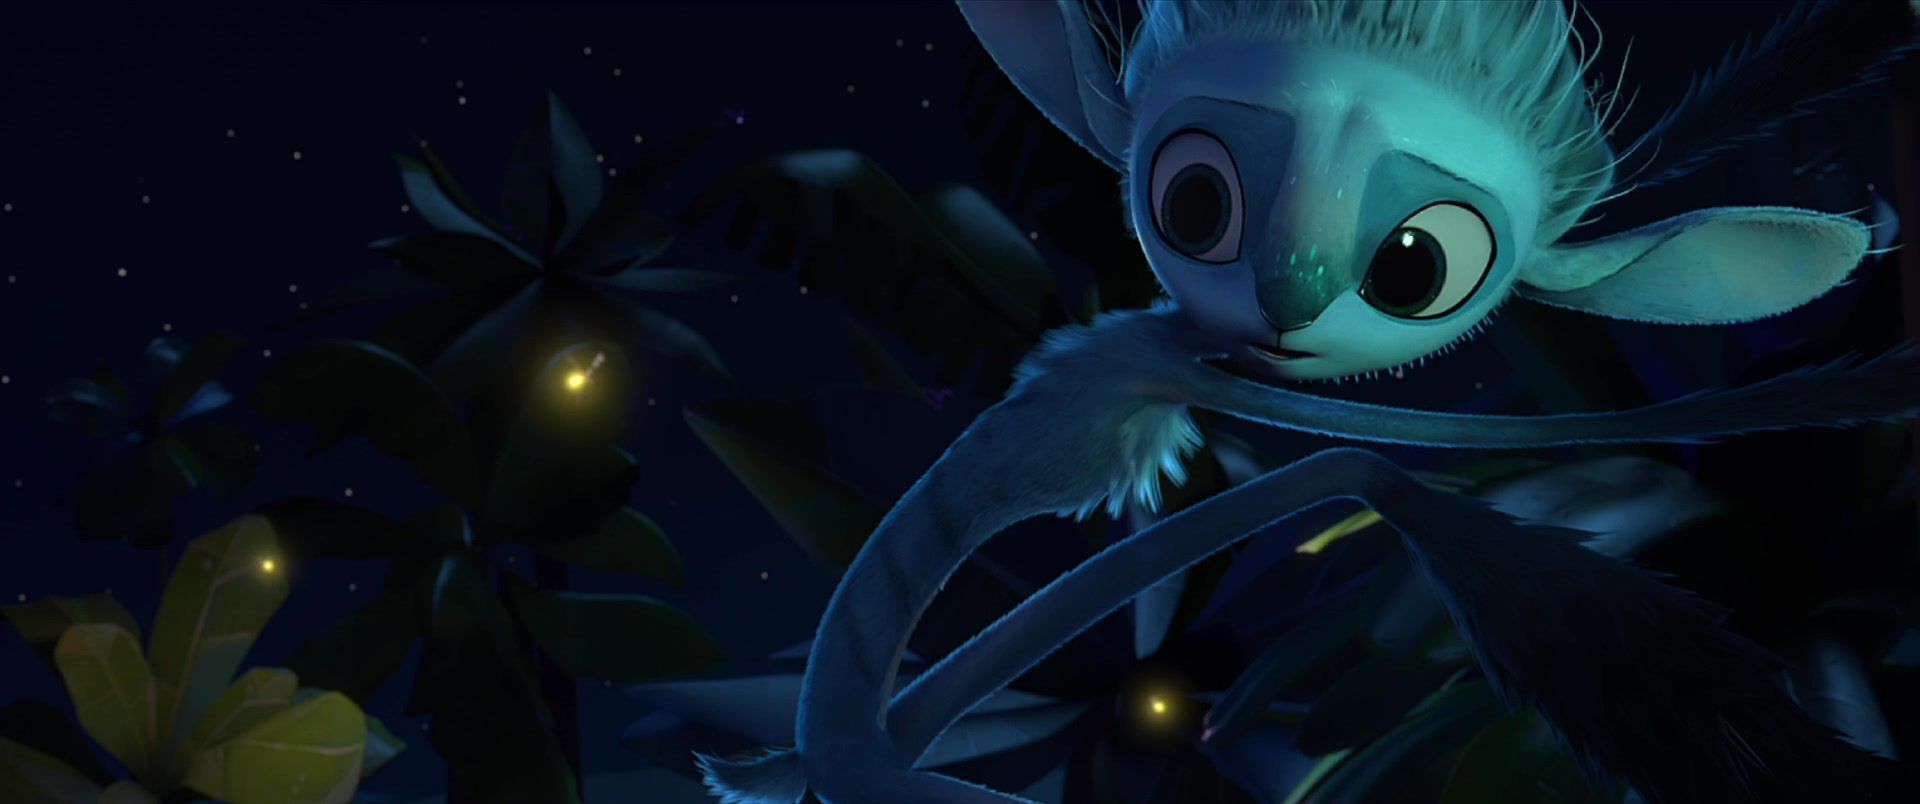 Image For Mune: Guardian of the Moon. Fancaps.net. Guardian of the moon, Guardian, Anime